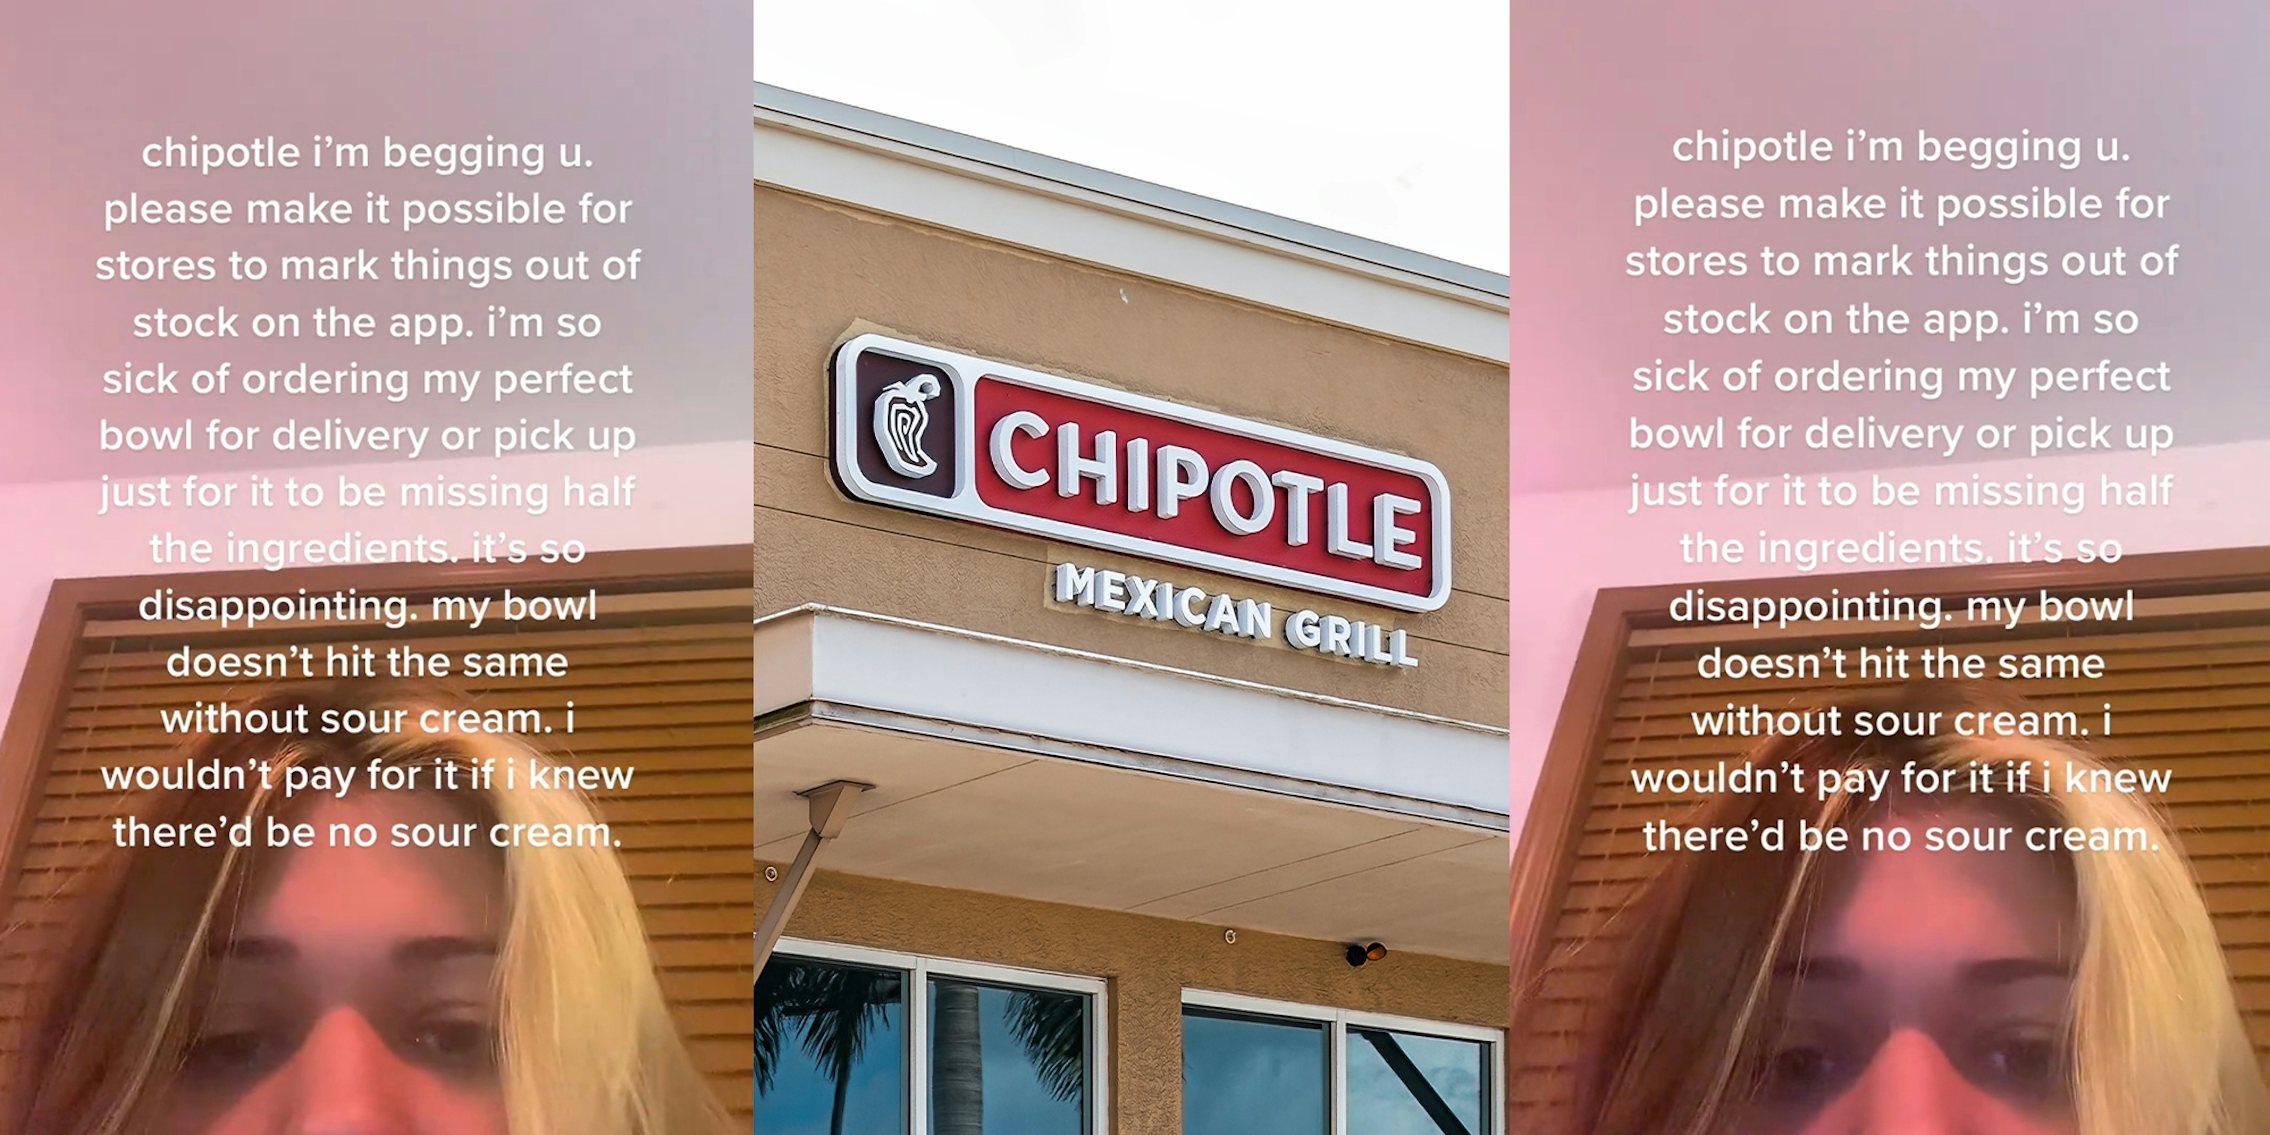 Customer calls out Chipotle for never marking missing ingredients 'out of stock' in the app